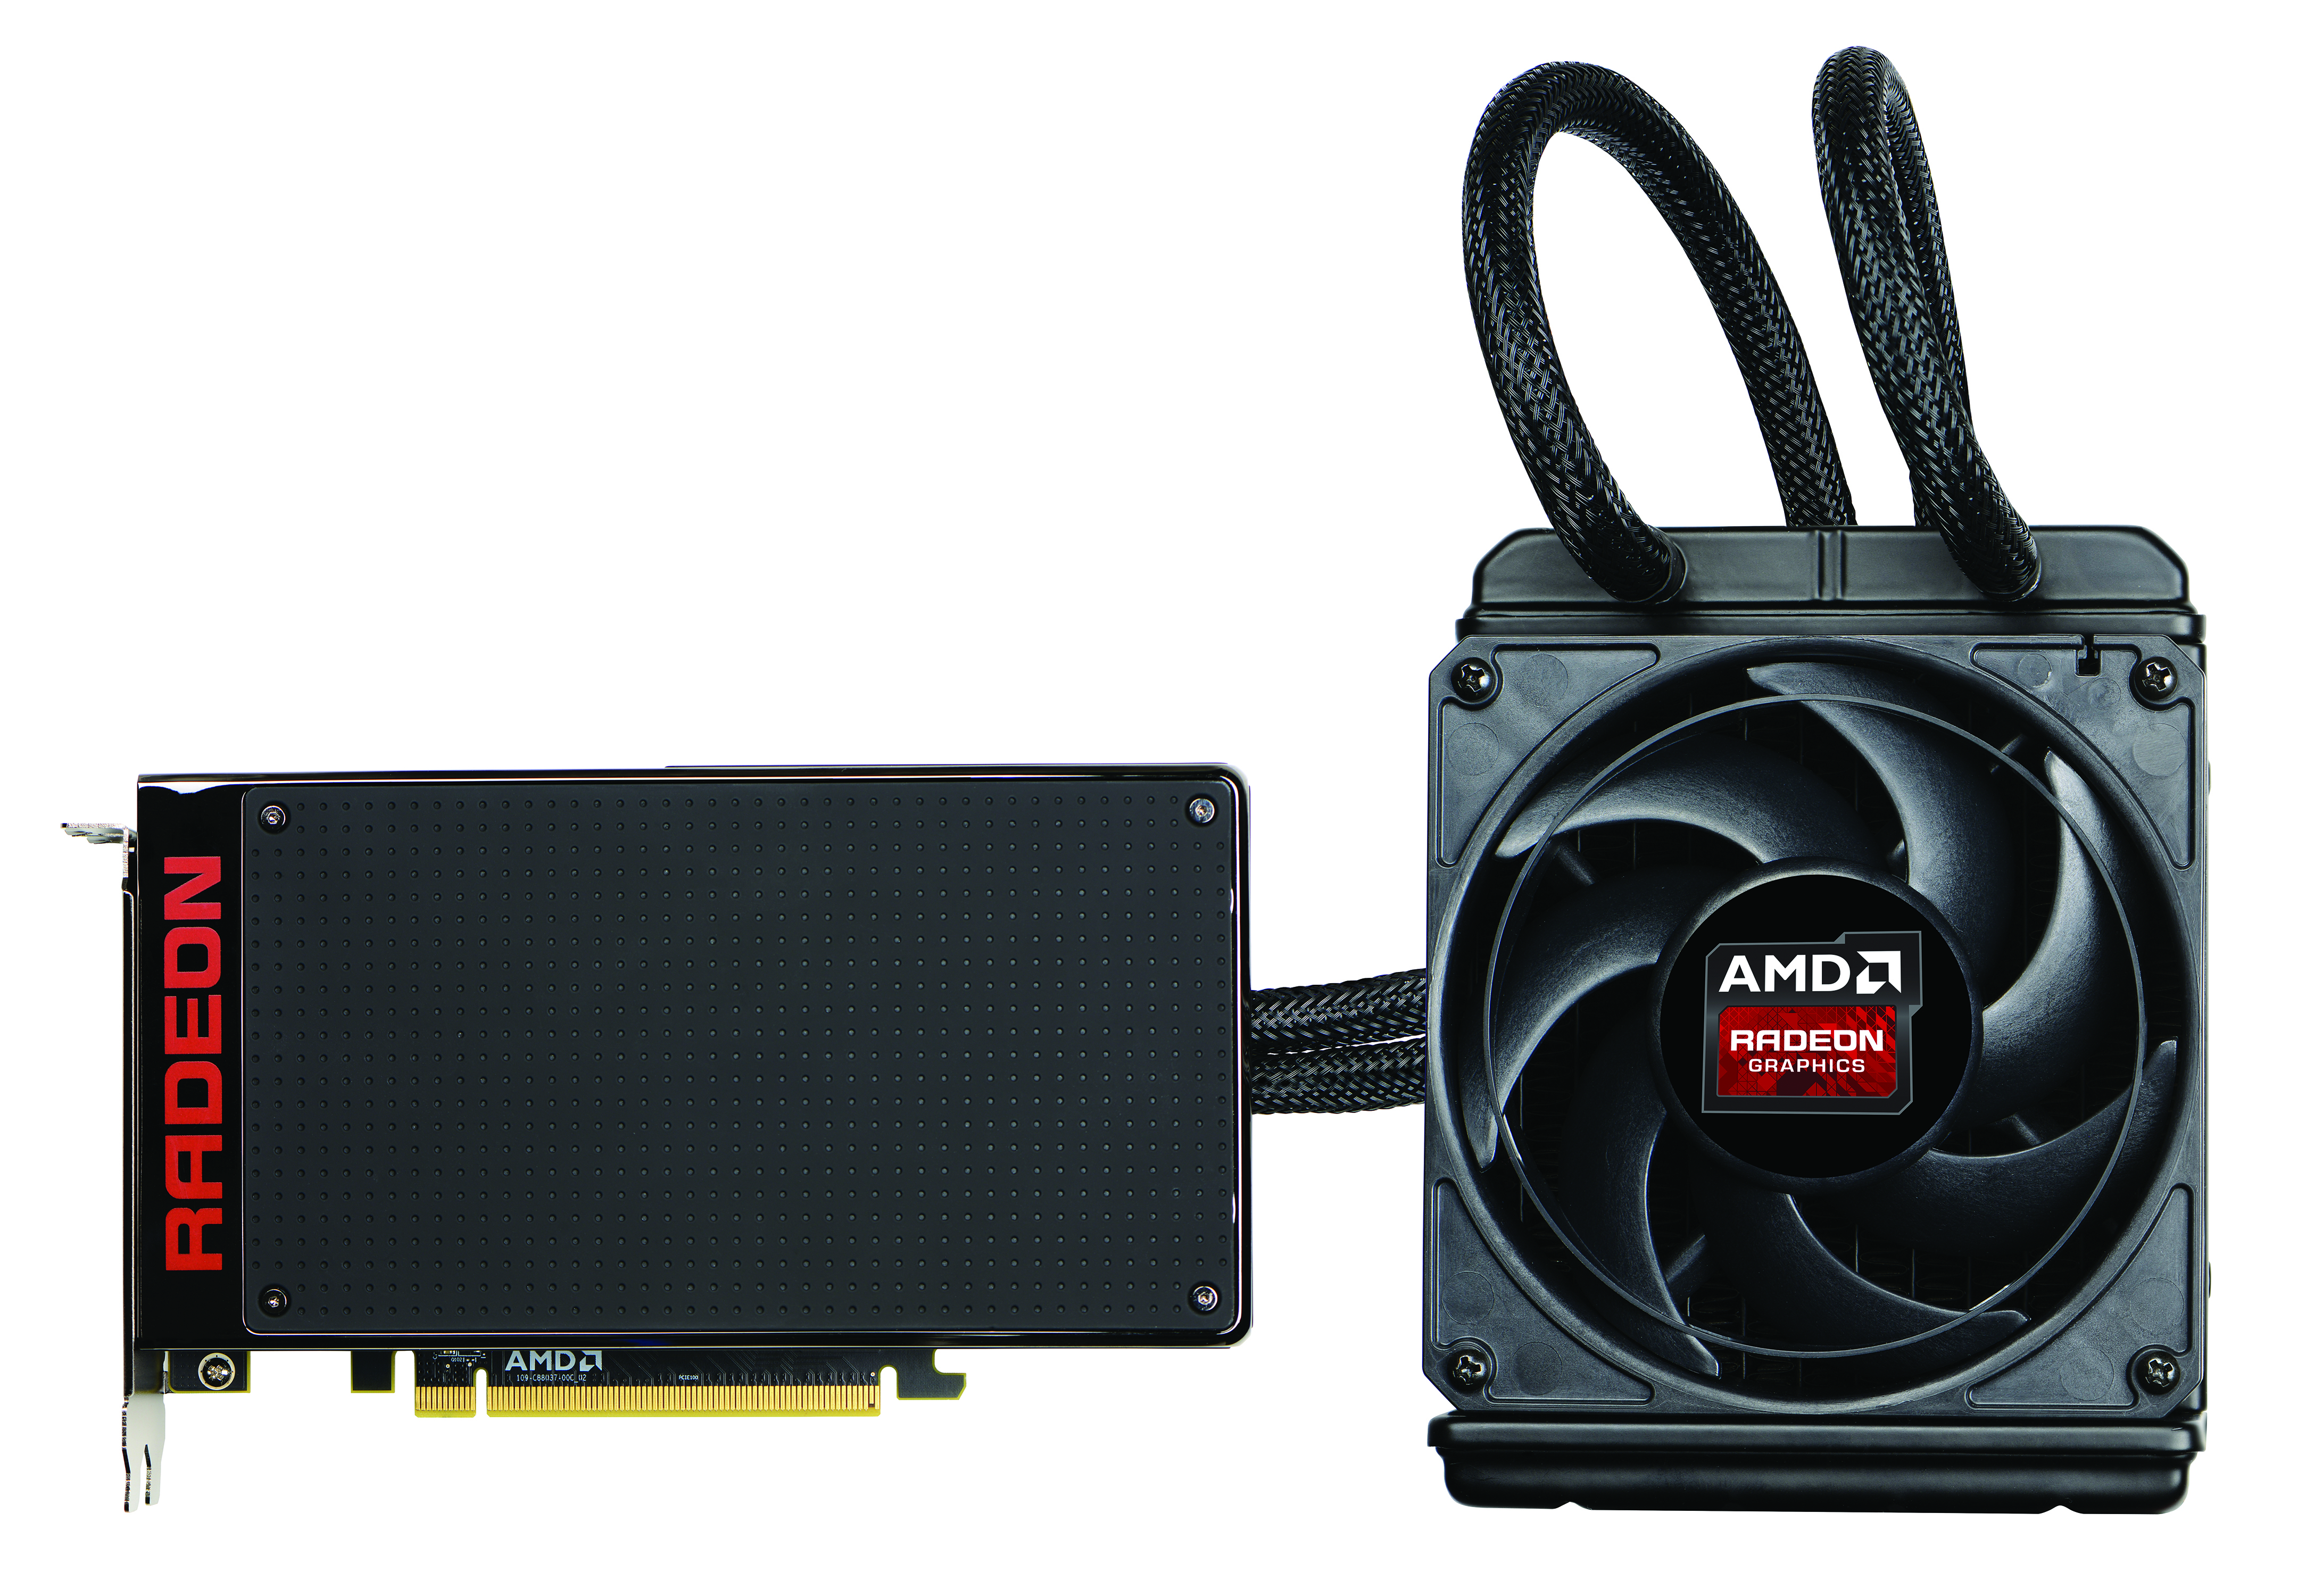 The AMD Radeon R9 Fury X Review 